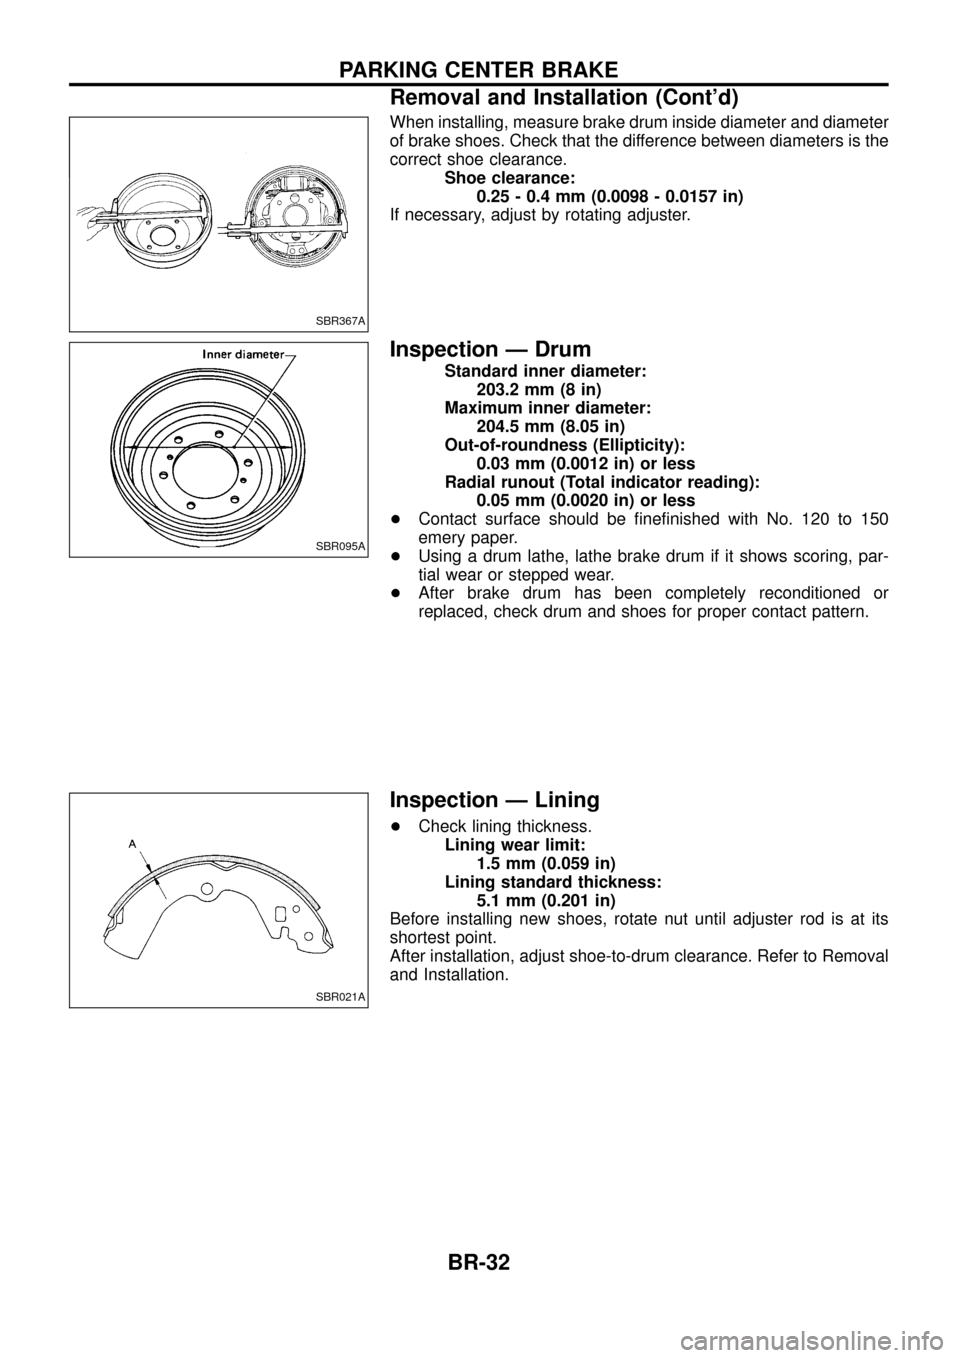 NISSAN PATROL 1998 Y61 / 5.G Brake System Owners Guide When installing, measure brake drum inside diameter and diameter
of brake shoes. Check that the difference between diameters is the
correct shoe clearance.Shoe clearance:0.25 - 0.4 mm (0.0098 - 0.0157